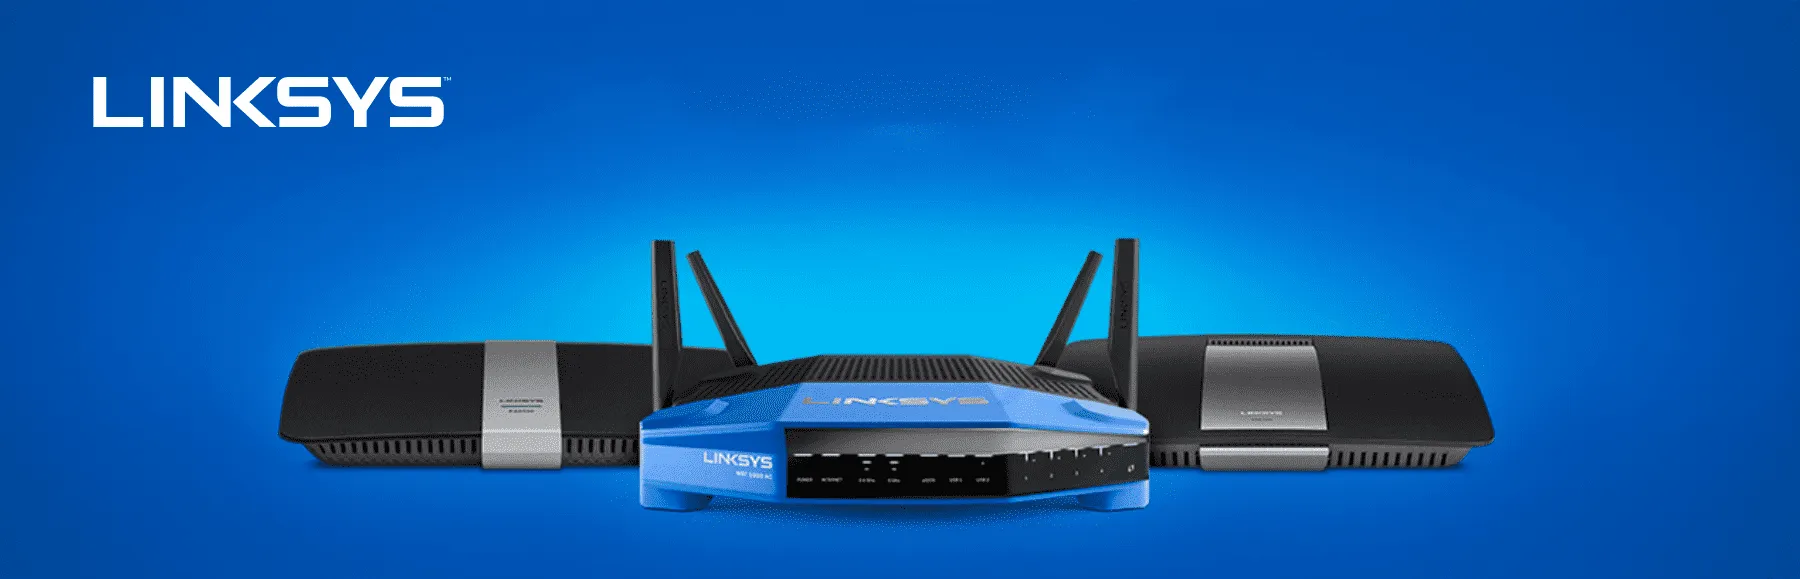 Productos Linksys